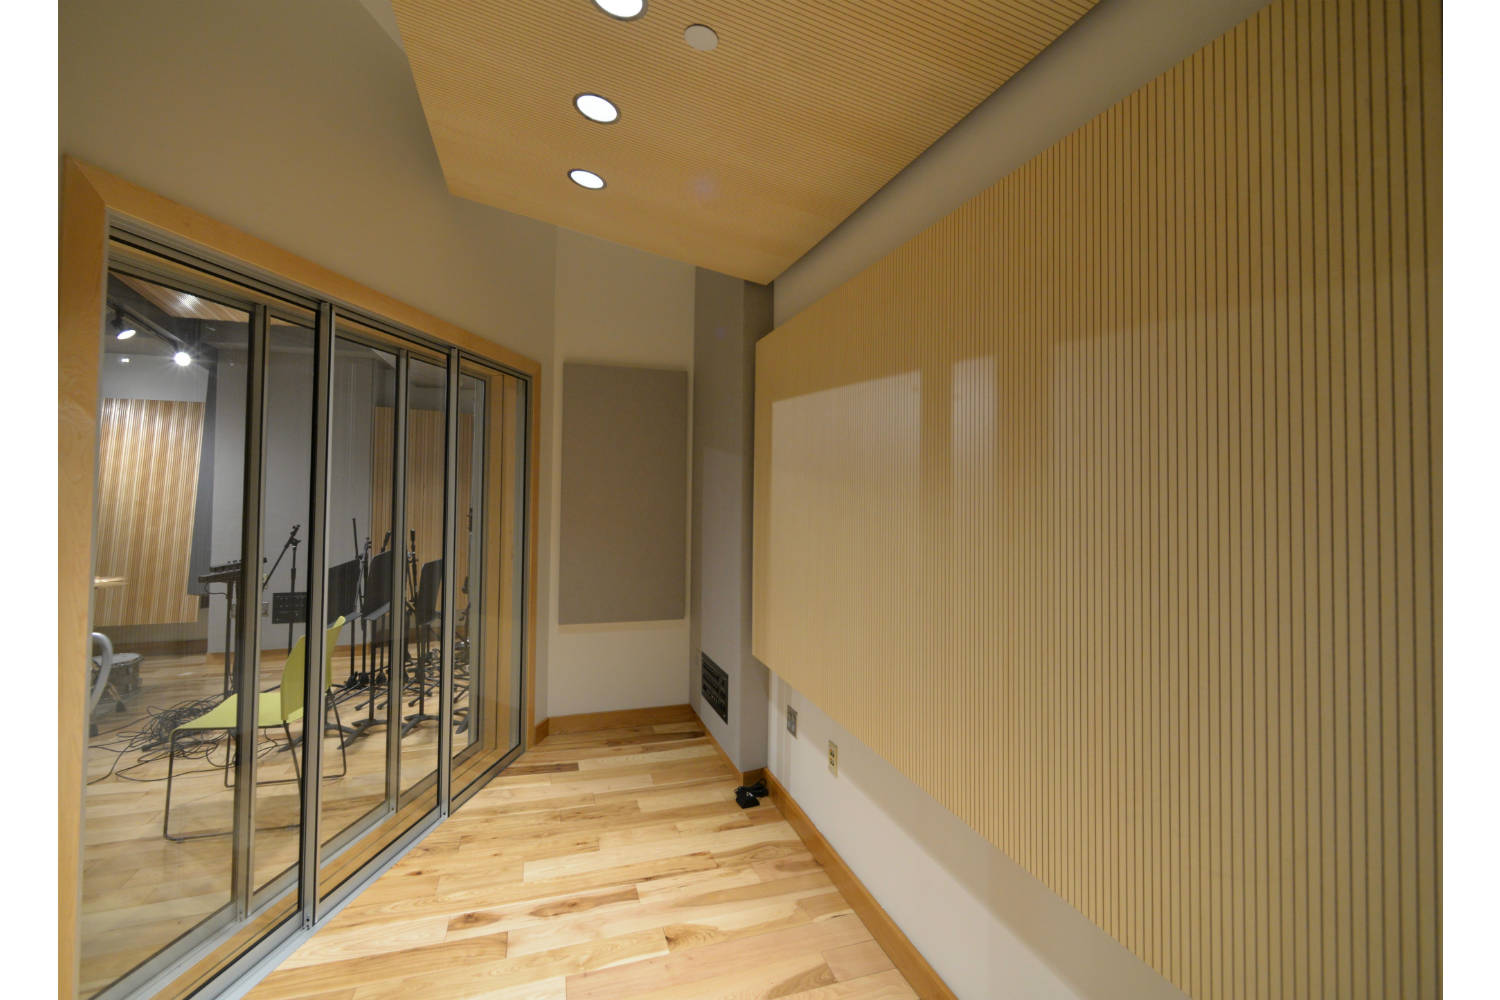 Drexel University in Philadelphia, PA is one of America's 15 largest universities. Their brand-new recording facilities, designed by the WSDG team, expands their music and recording program. ISO Booth